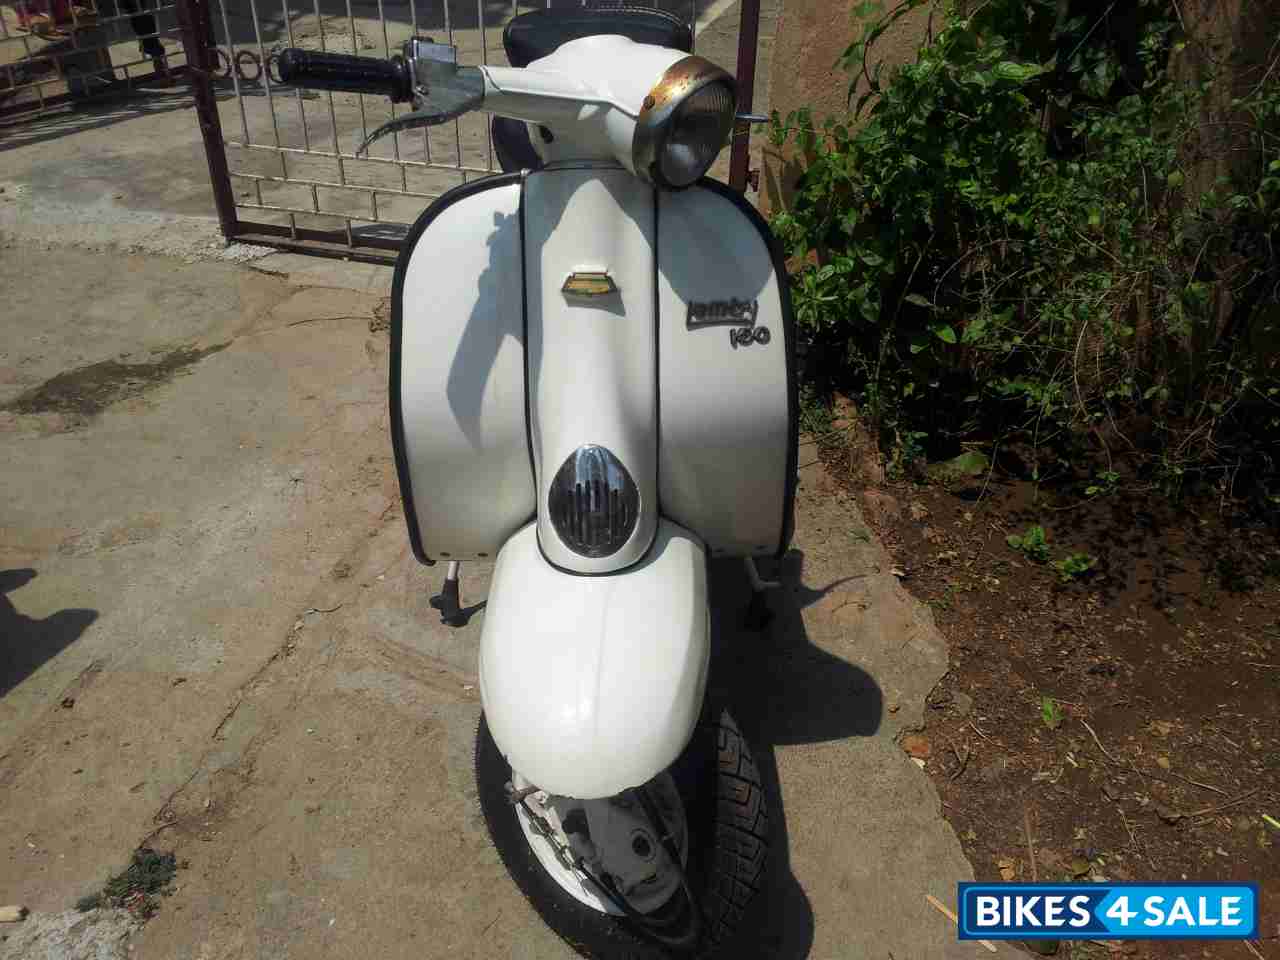 White Vintage Scooter Lamby 150